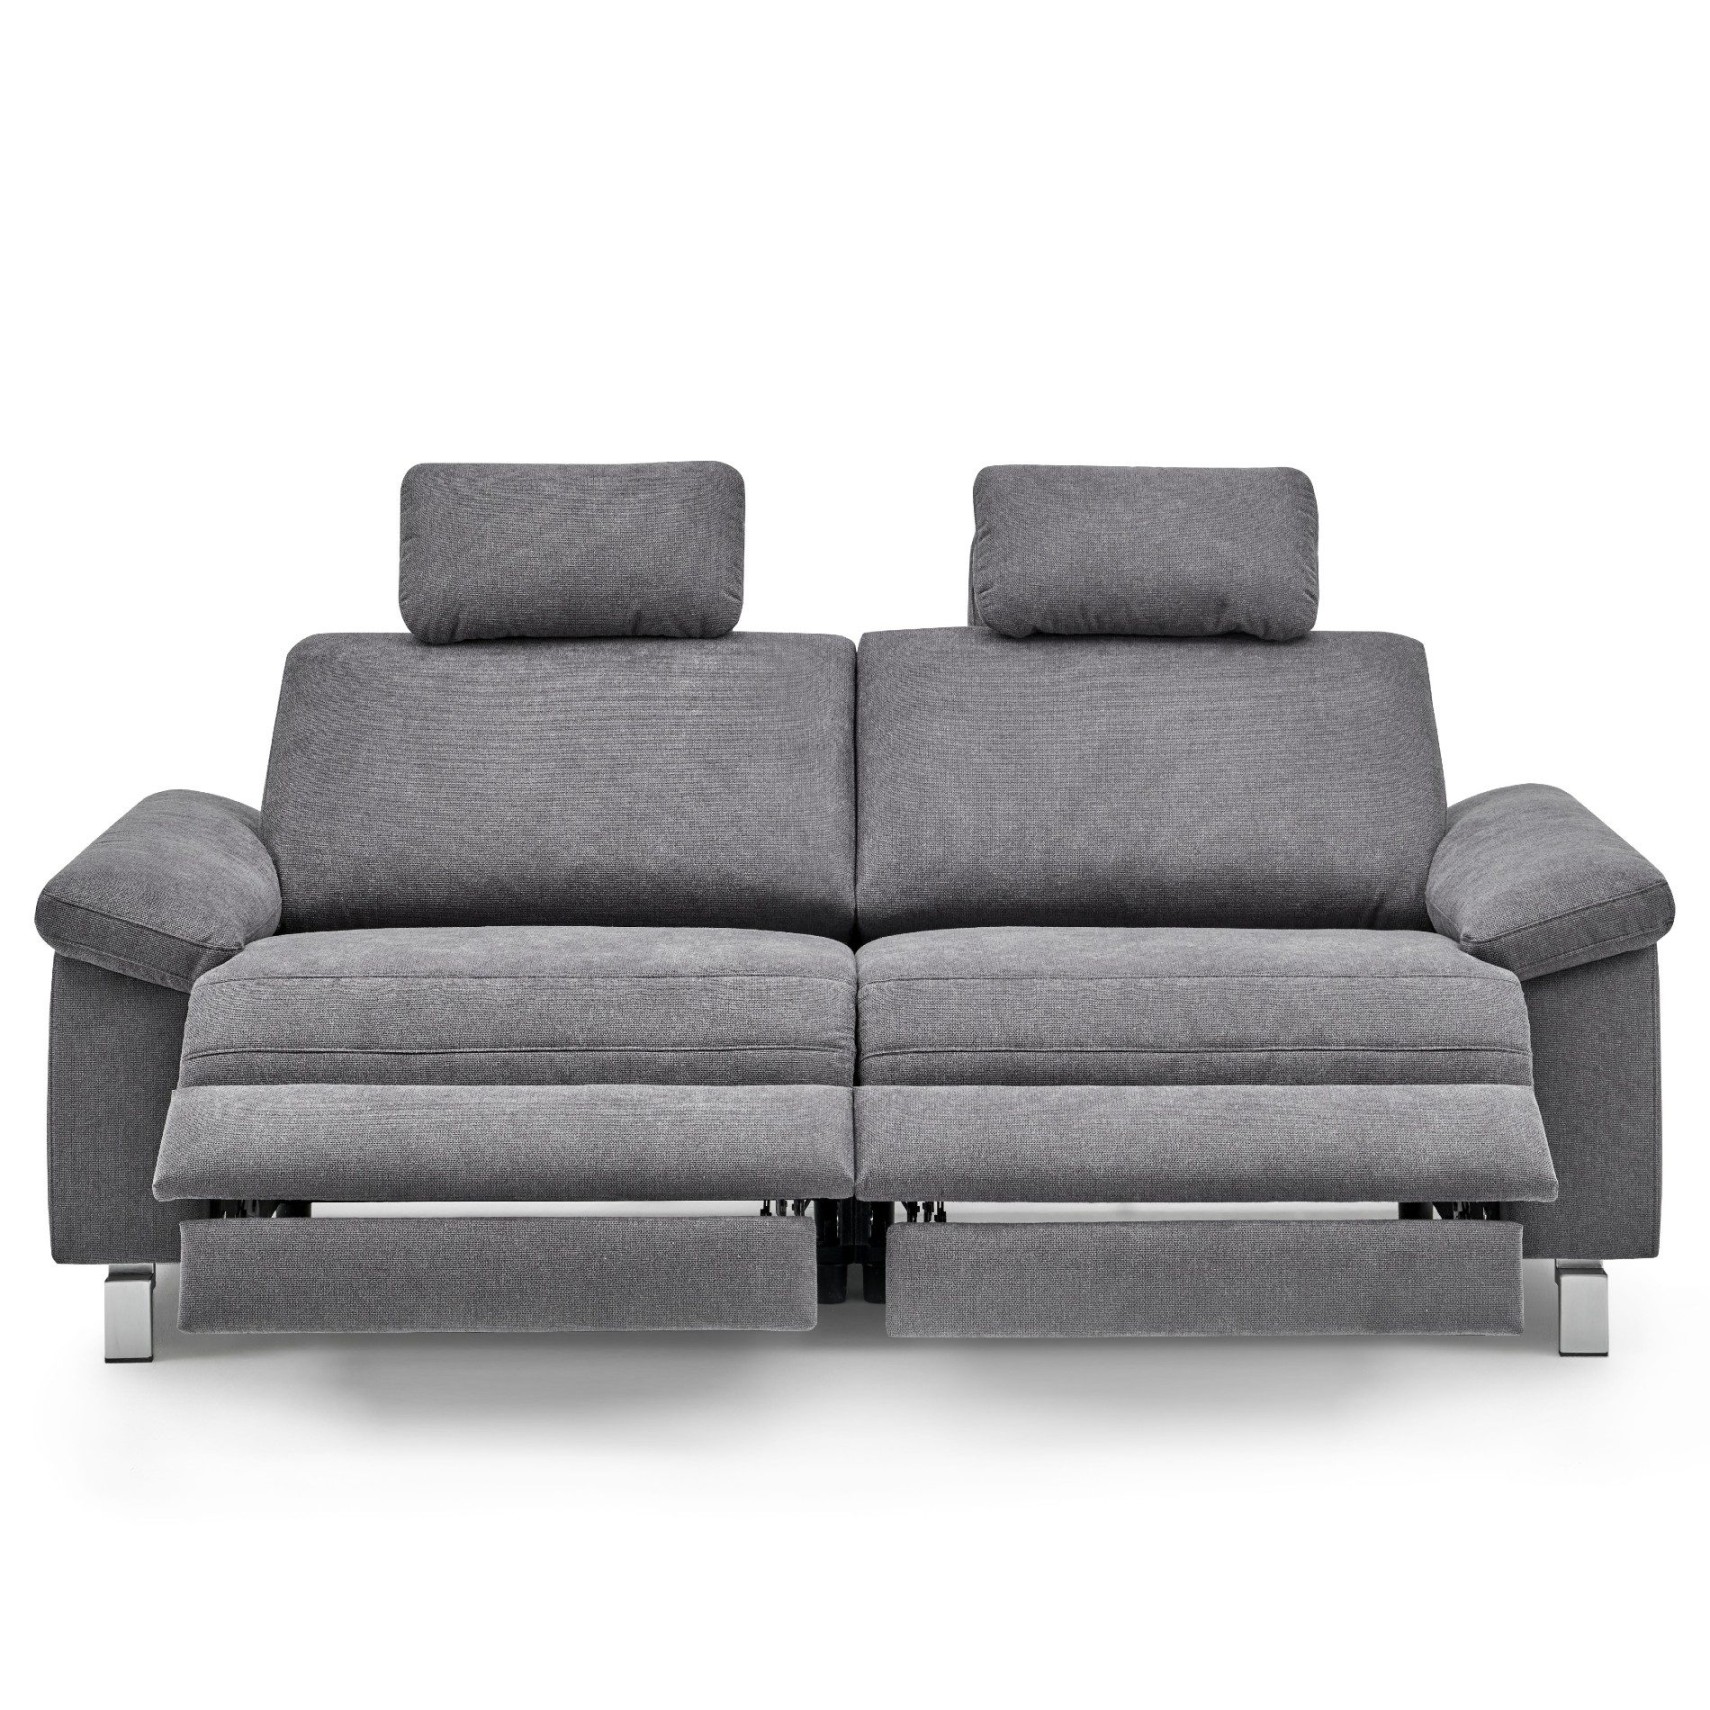 Trendstore Calm Plus Sofa -Sitzer mit Relaxfunktion - wohnparc